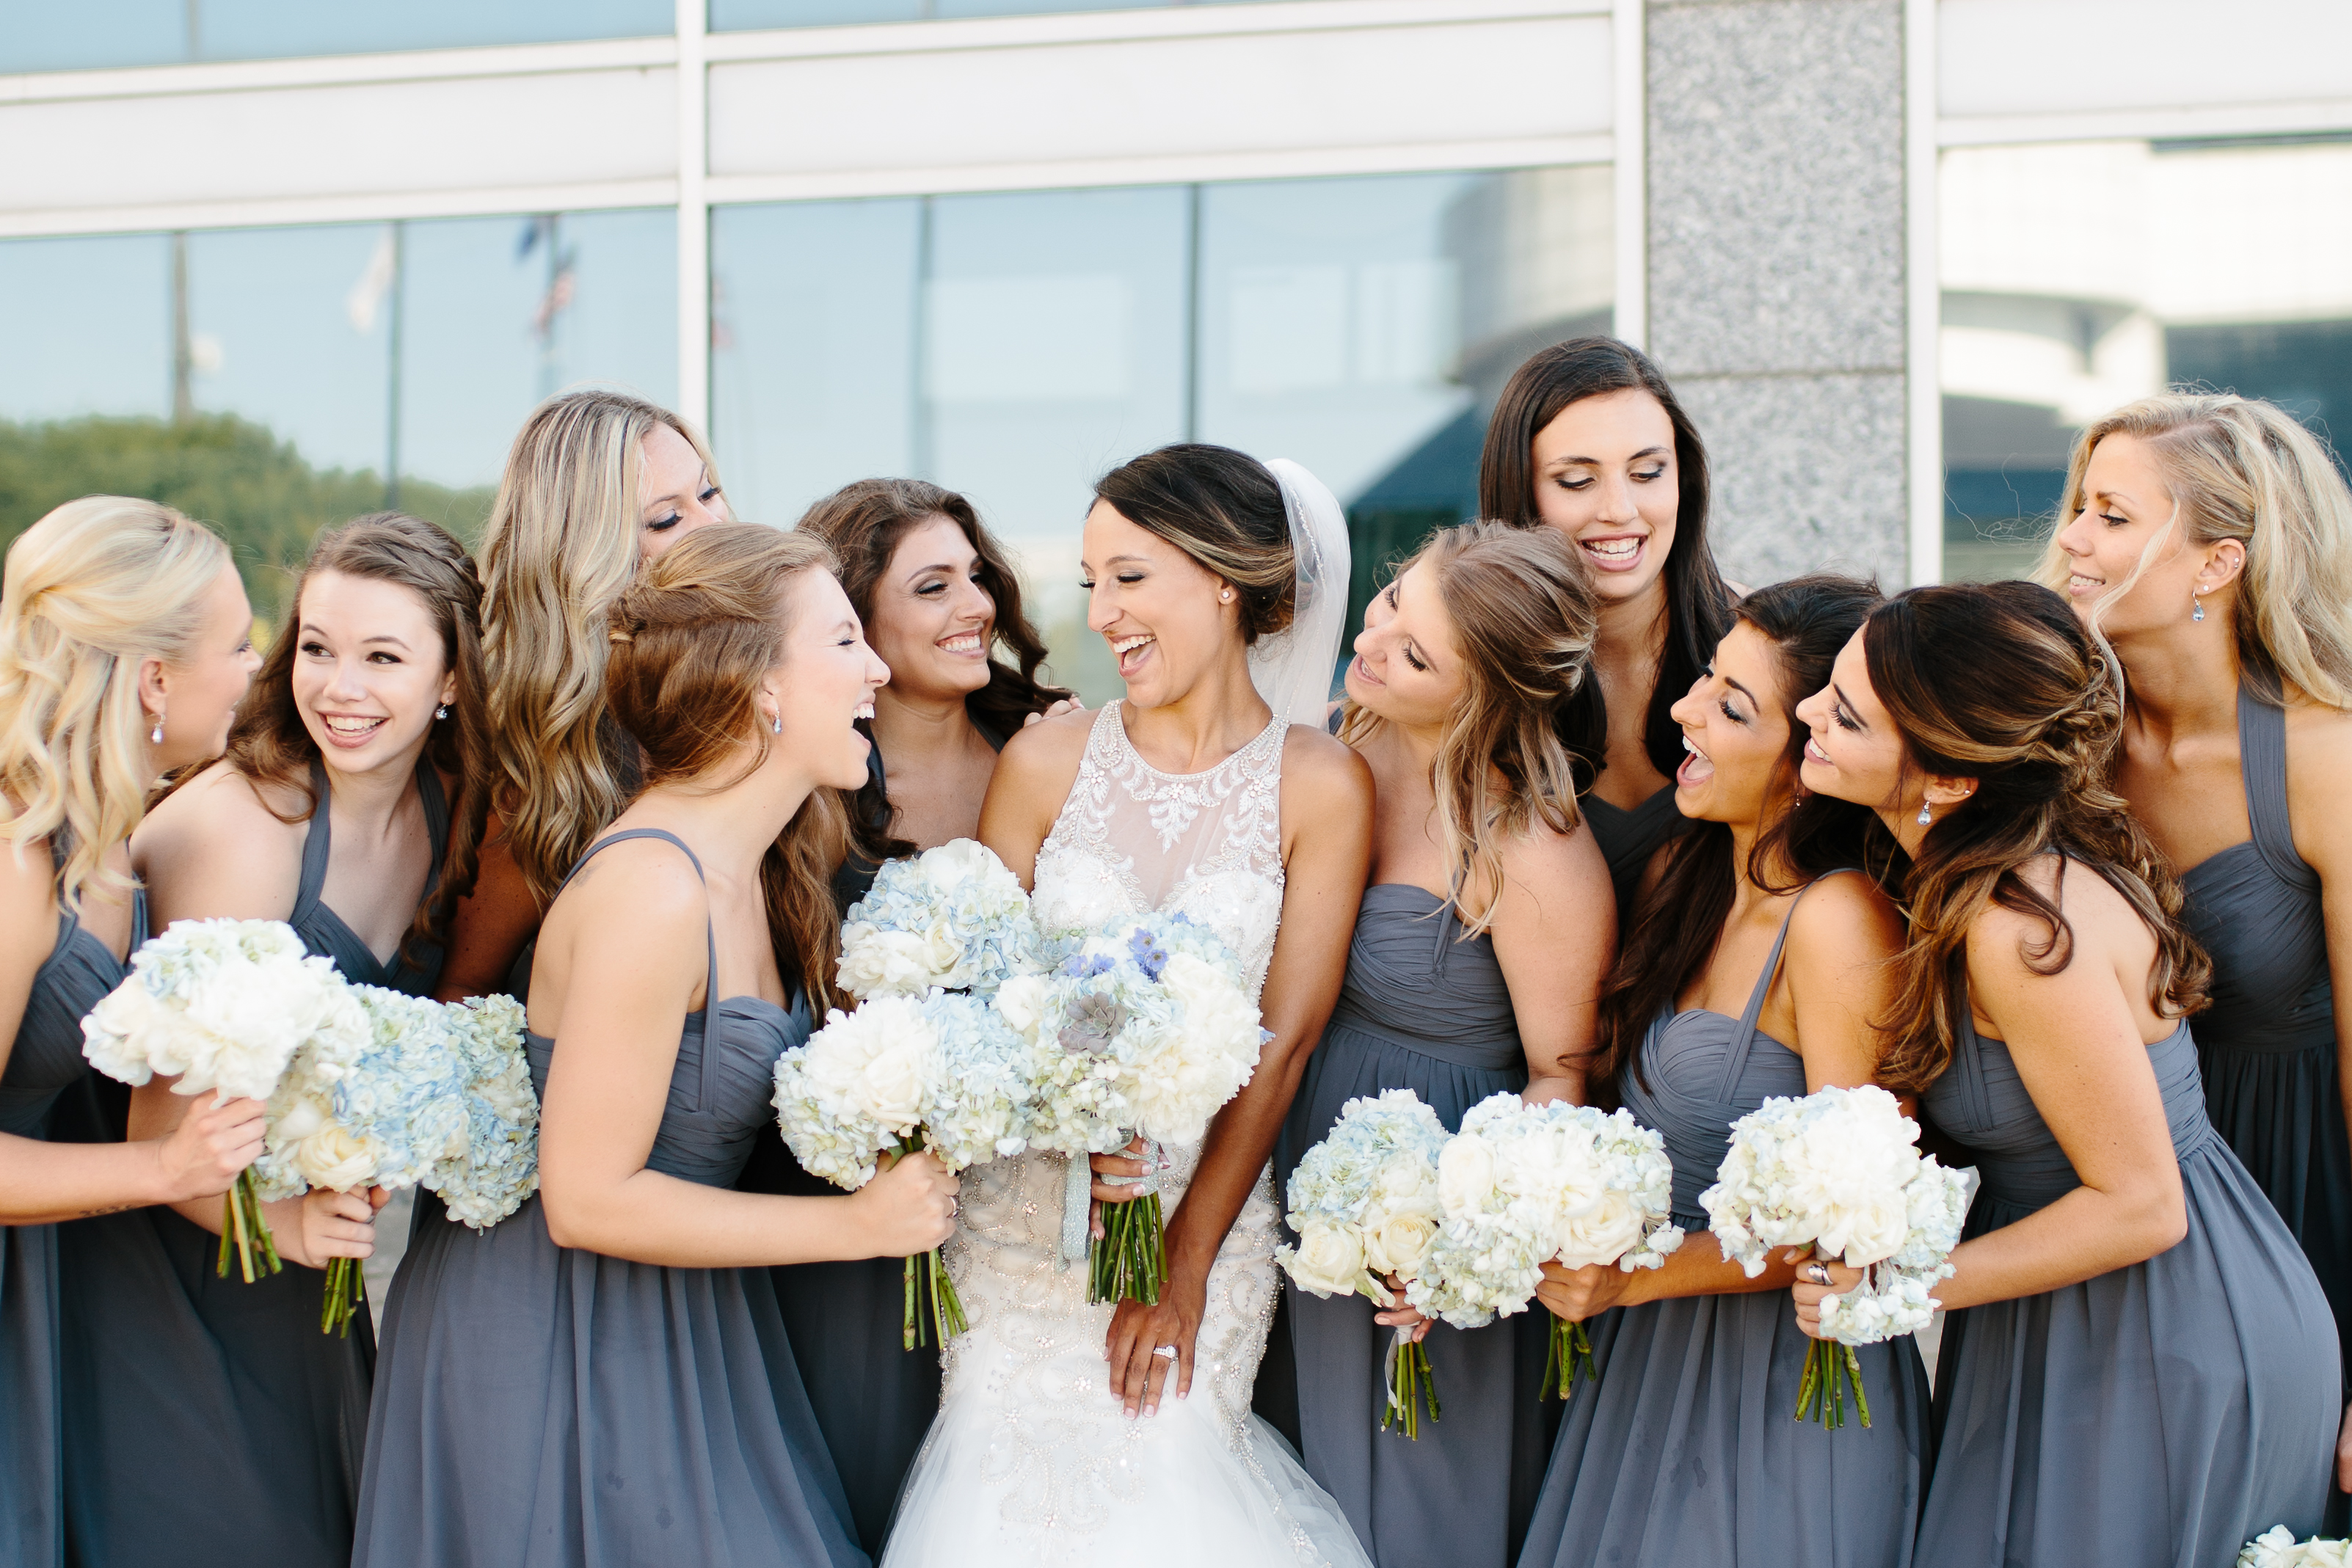 Bridesmaids laughing in Grey and blue dresses